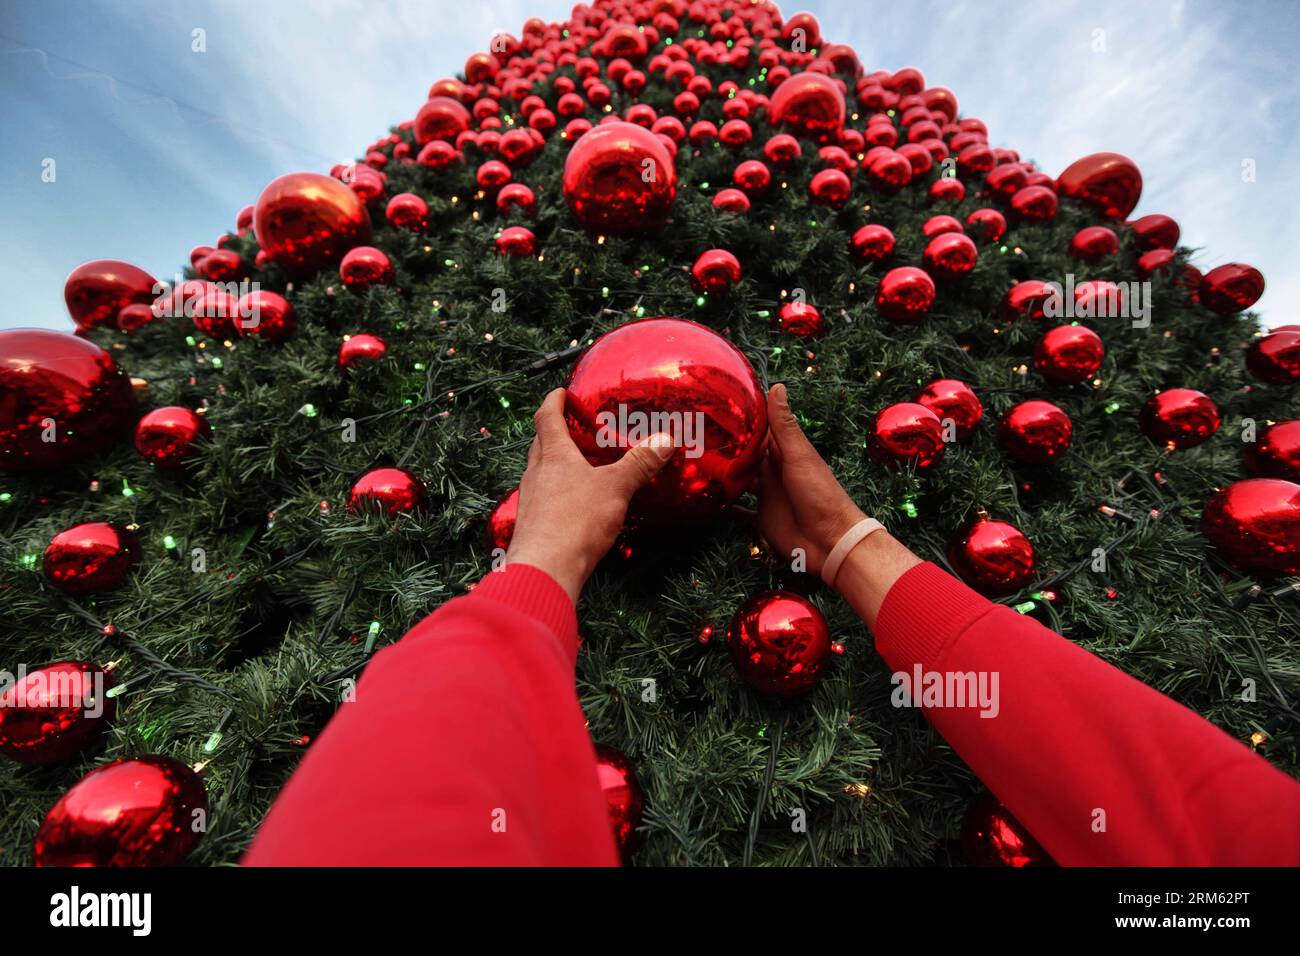 Bildnummer: 60775423  Datum: 30.11.2013  Copyright: imago/Xinhua     A worker puts final touches on a huge Christmas tree erected near the Church of the Nativity in the West Bank city of Bethlehem on Nov. 30, 2013. (Xinhua/Luay Sababa) MIDEAST-BETHLEHEM-CHRISTMAS TREE PUBLICATIONxNOTxINxCHN xcb x0x 2013 quer Stock Photo